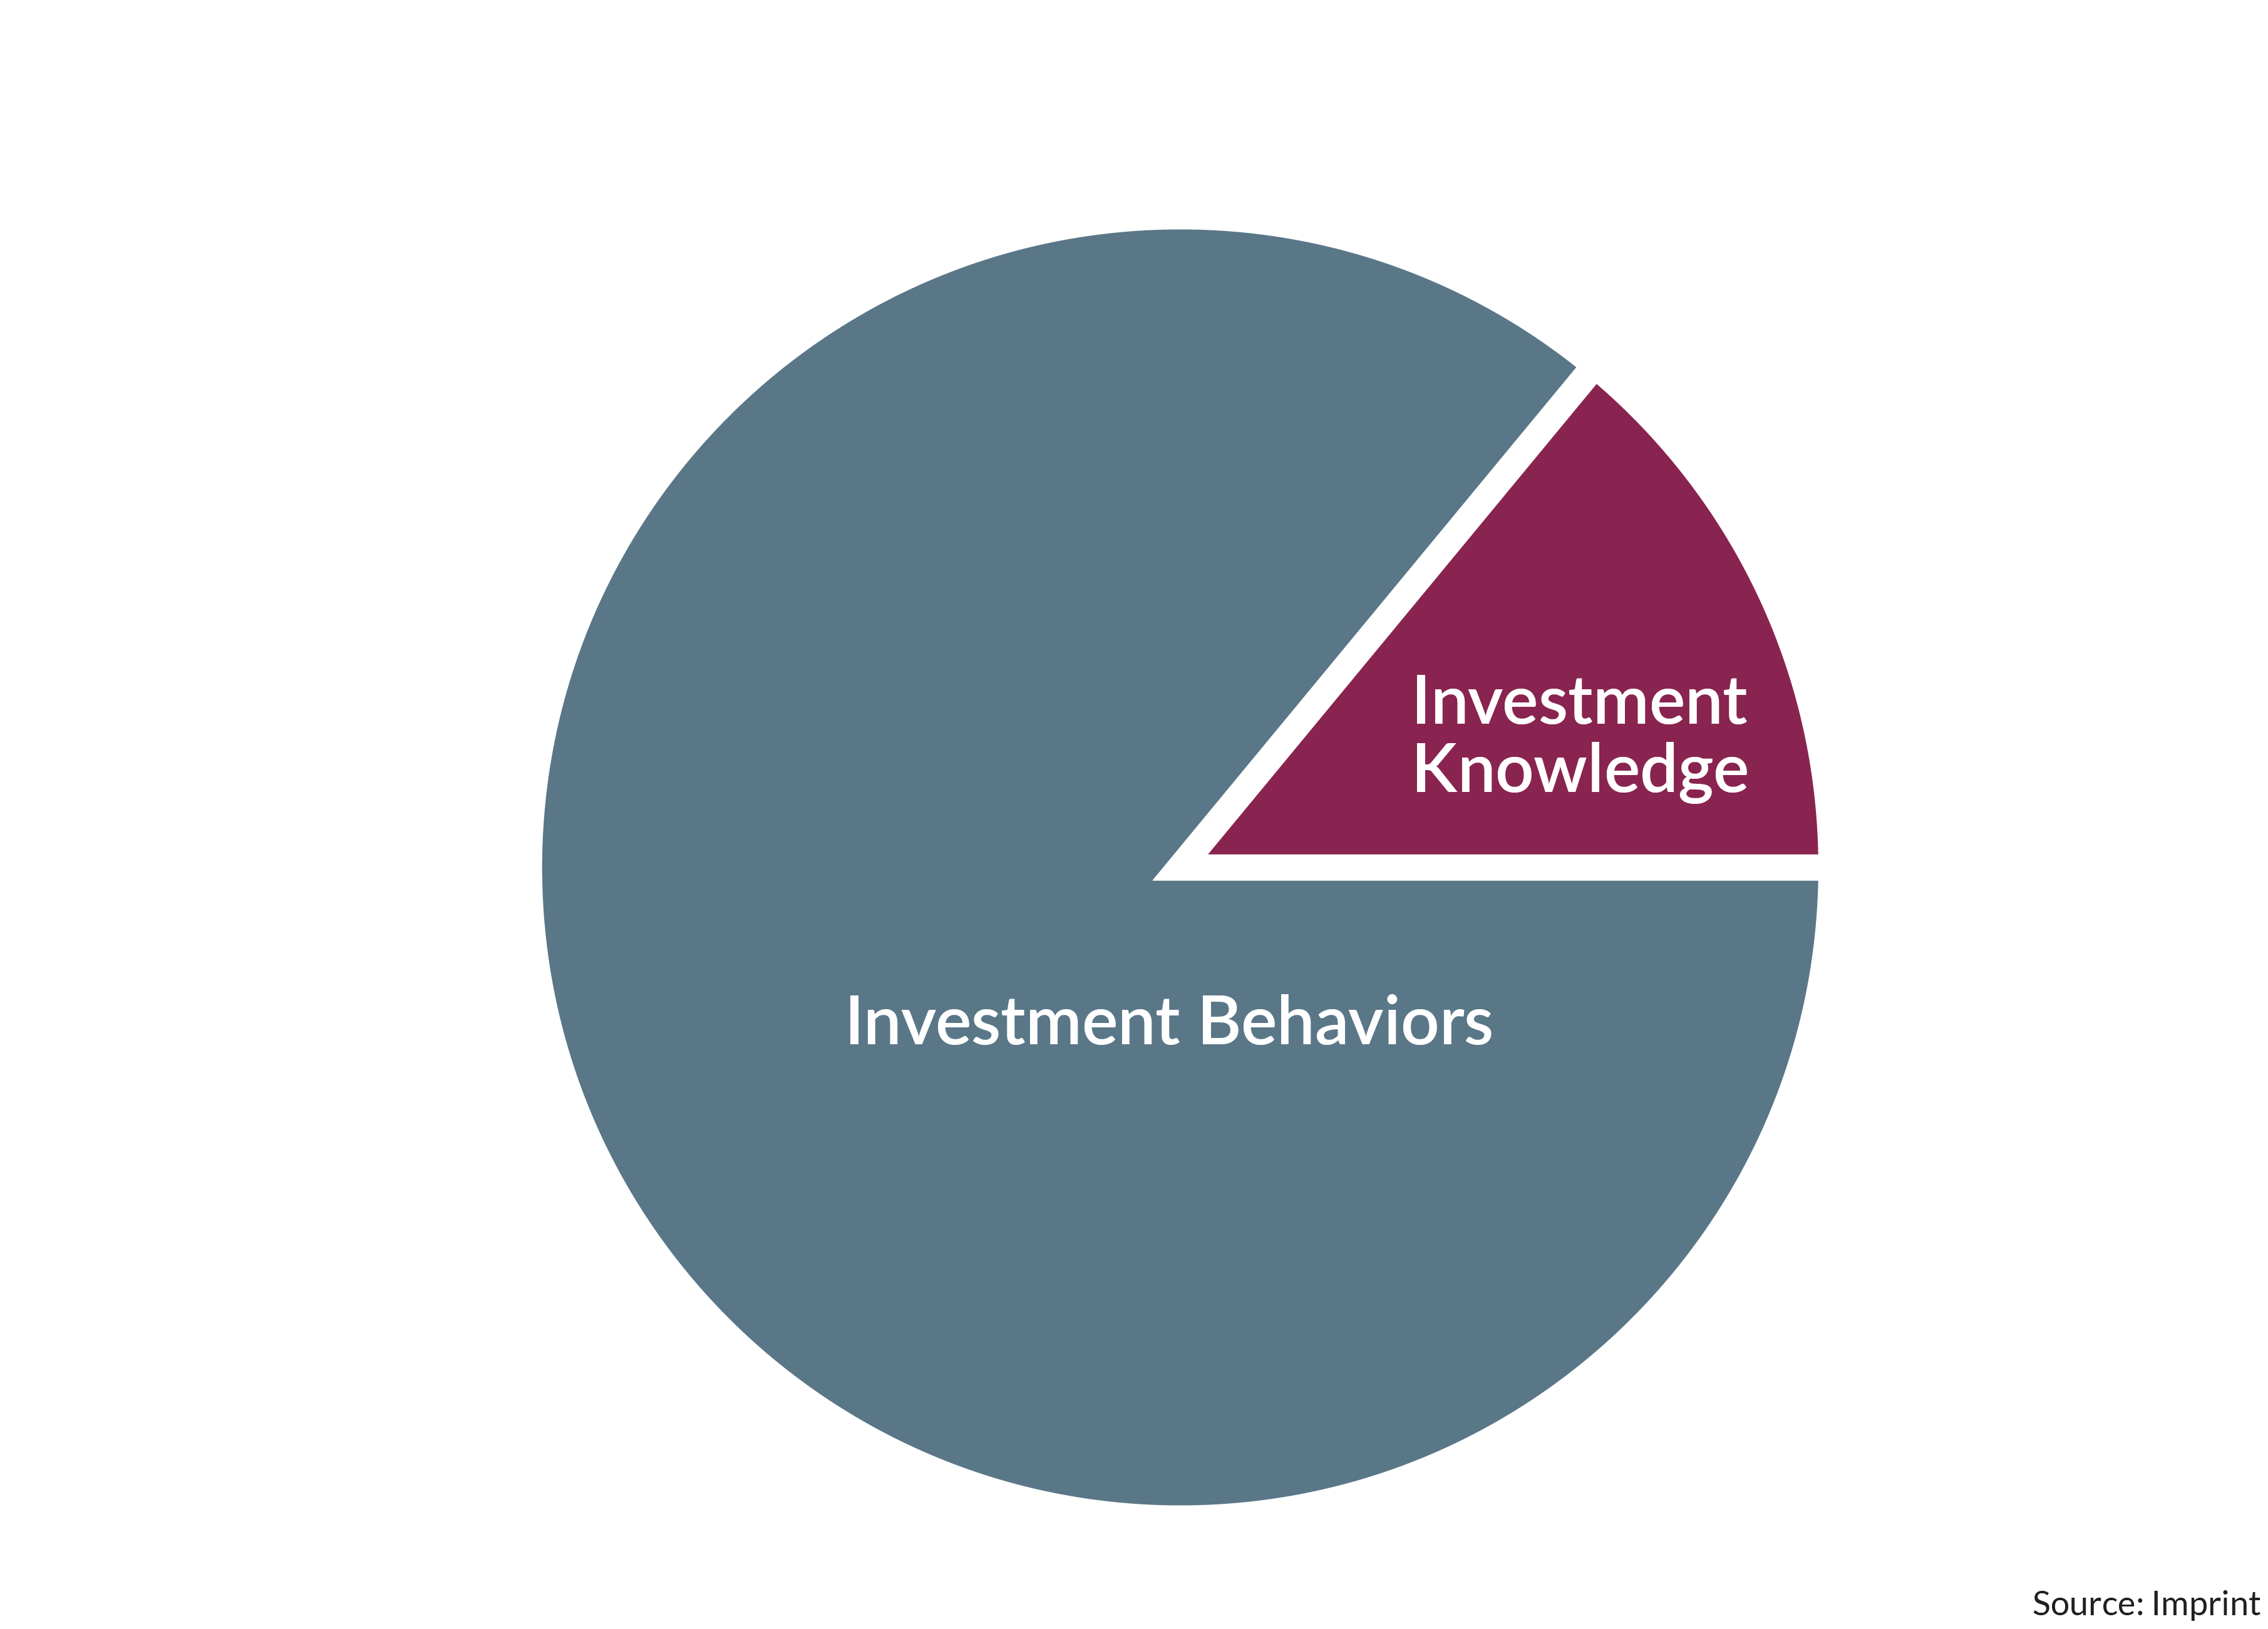 A round pie chart shows the relationship between investment knowledge and investment behaviors.